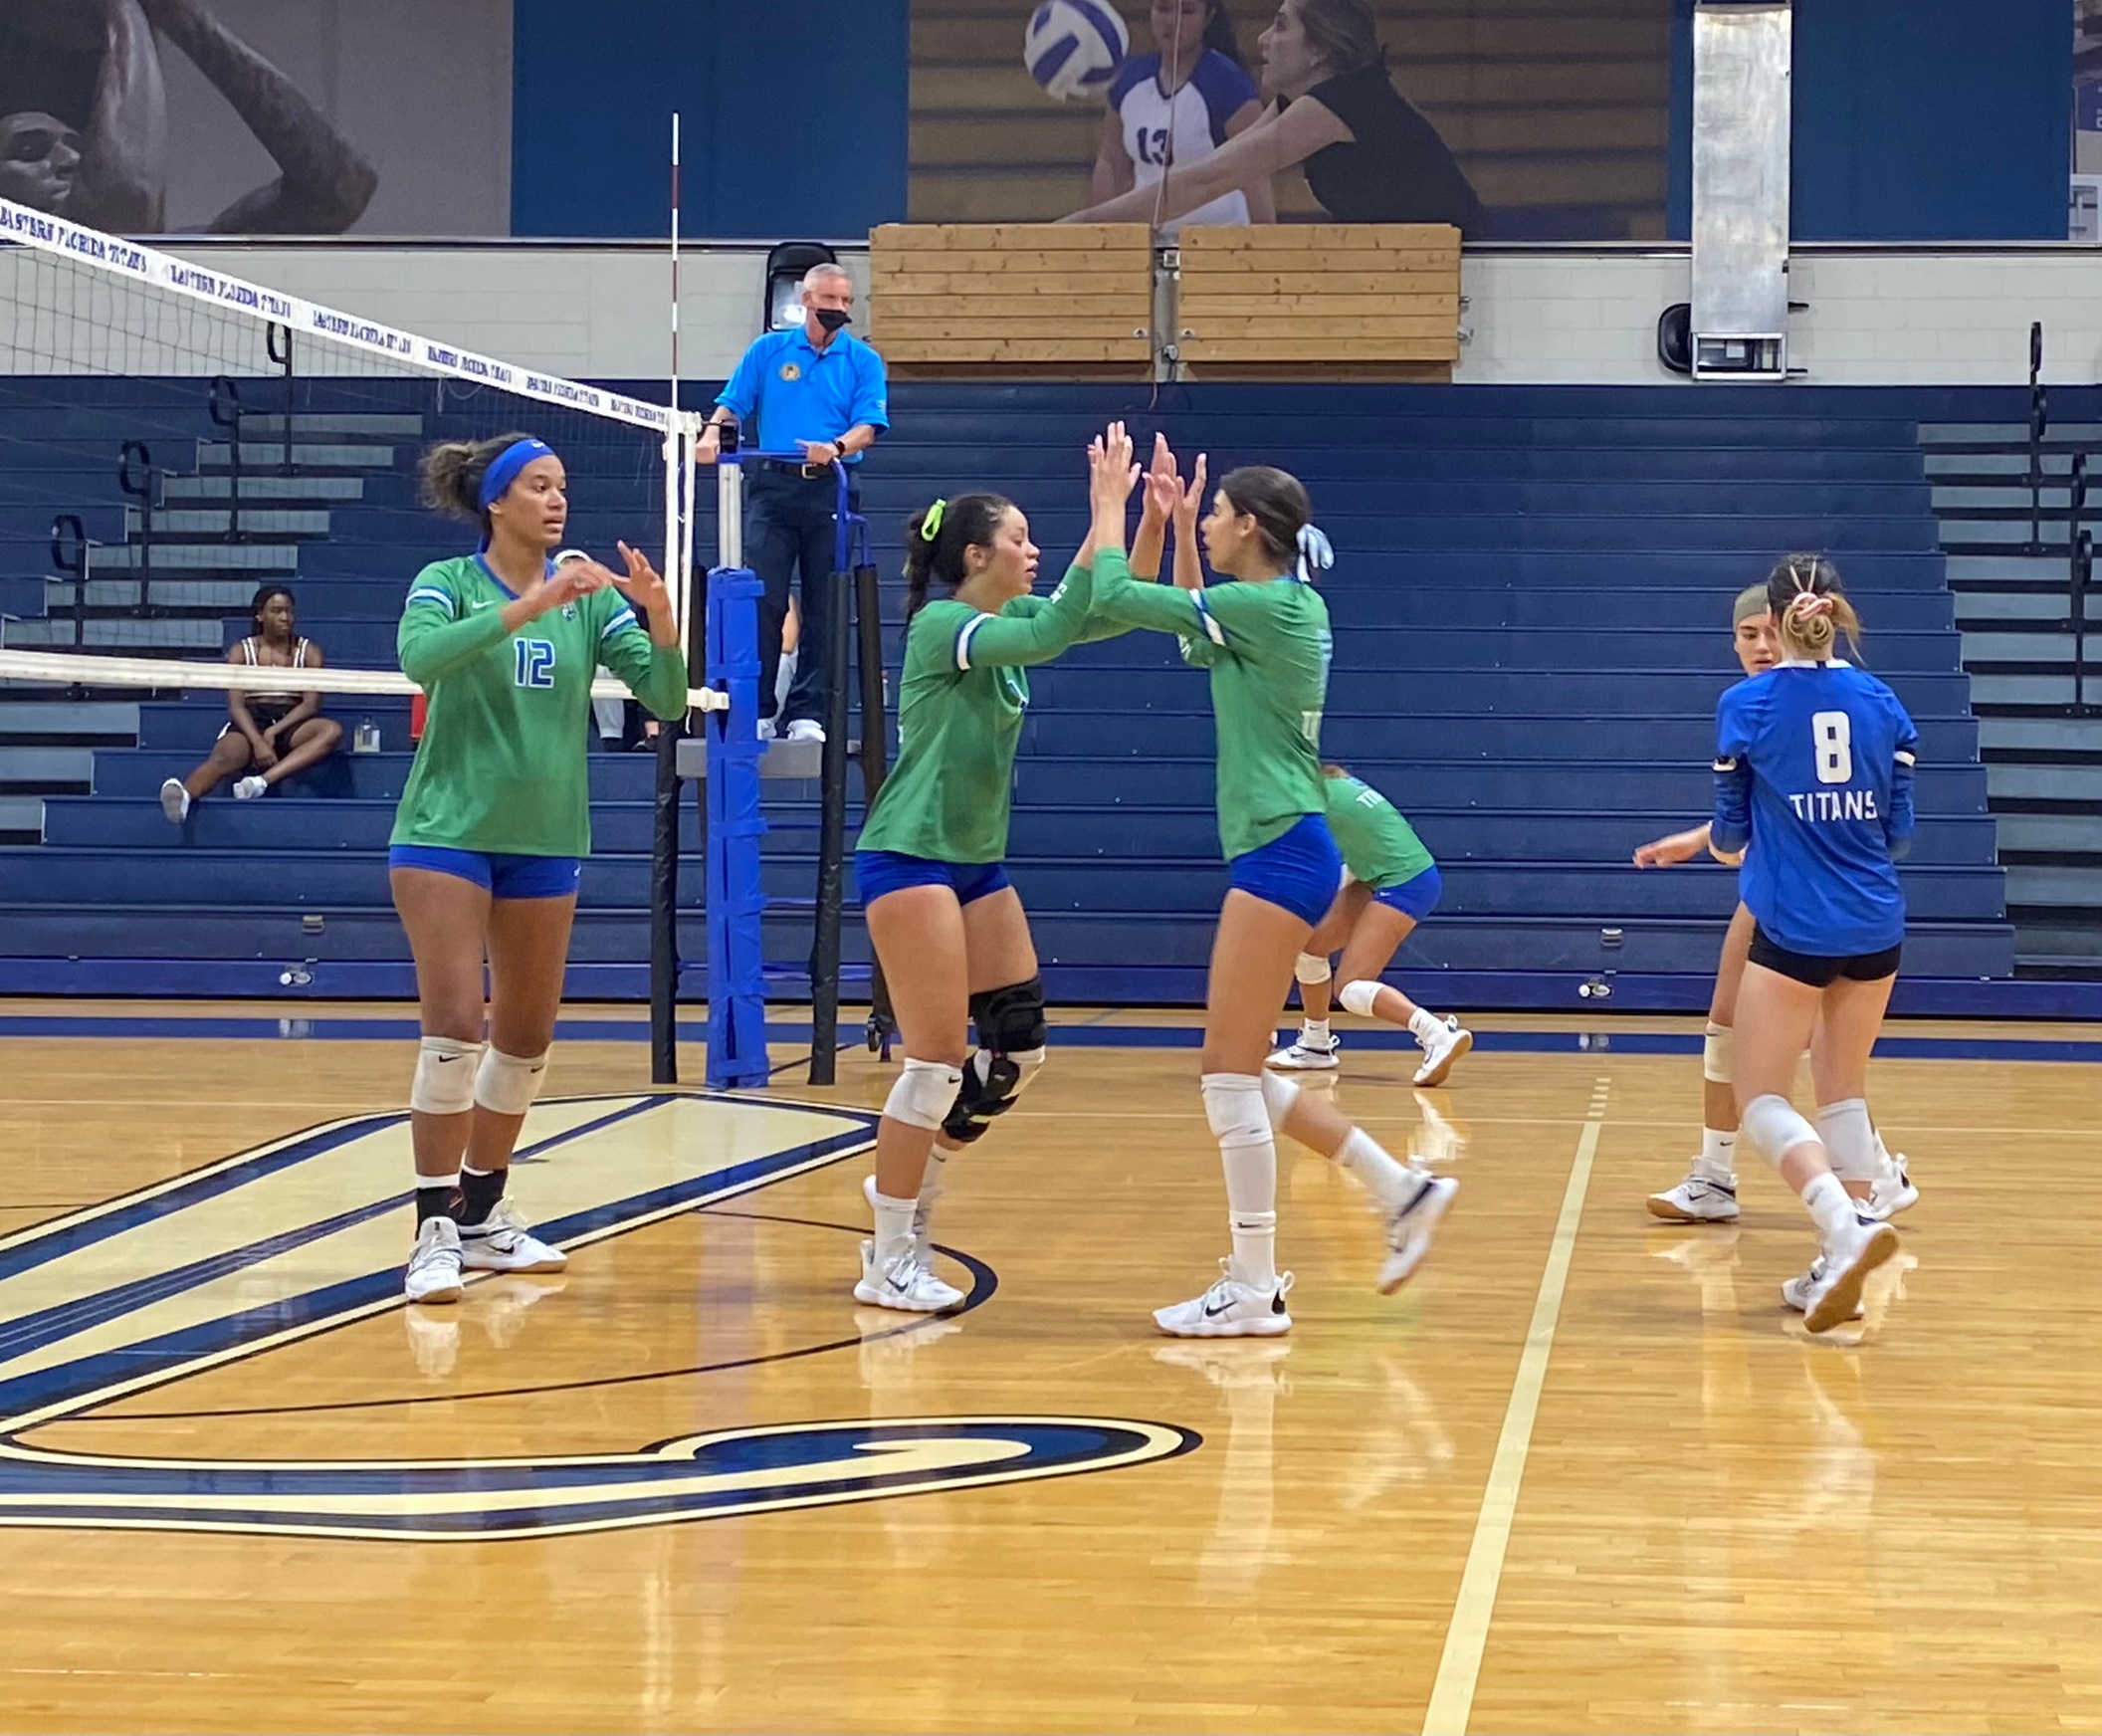 Volleyball team plays well in loss to Hillsborough